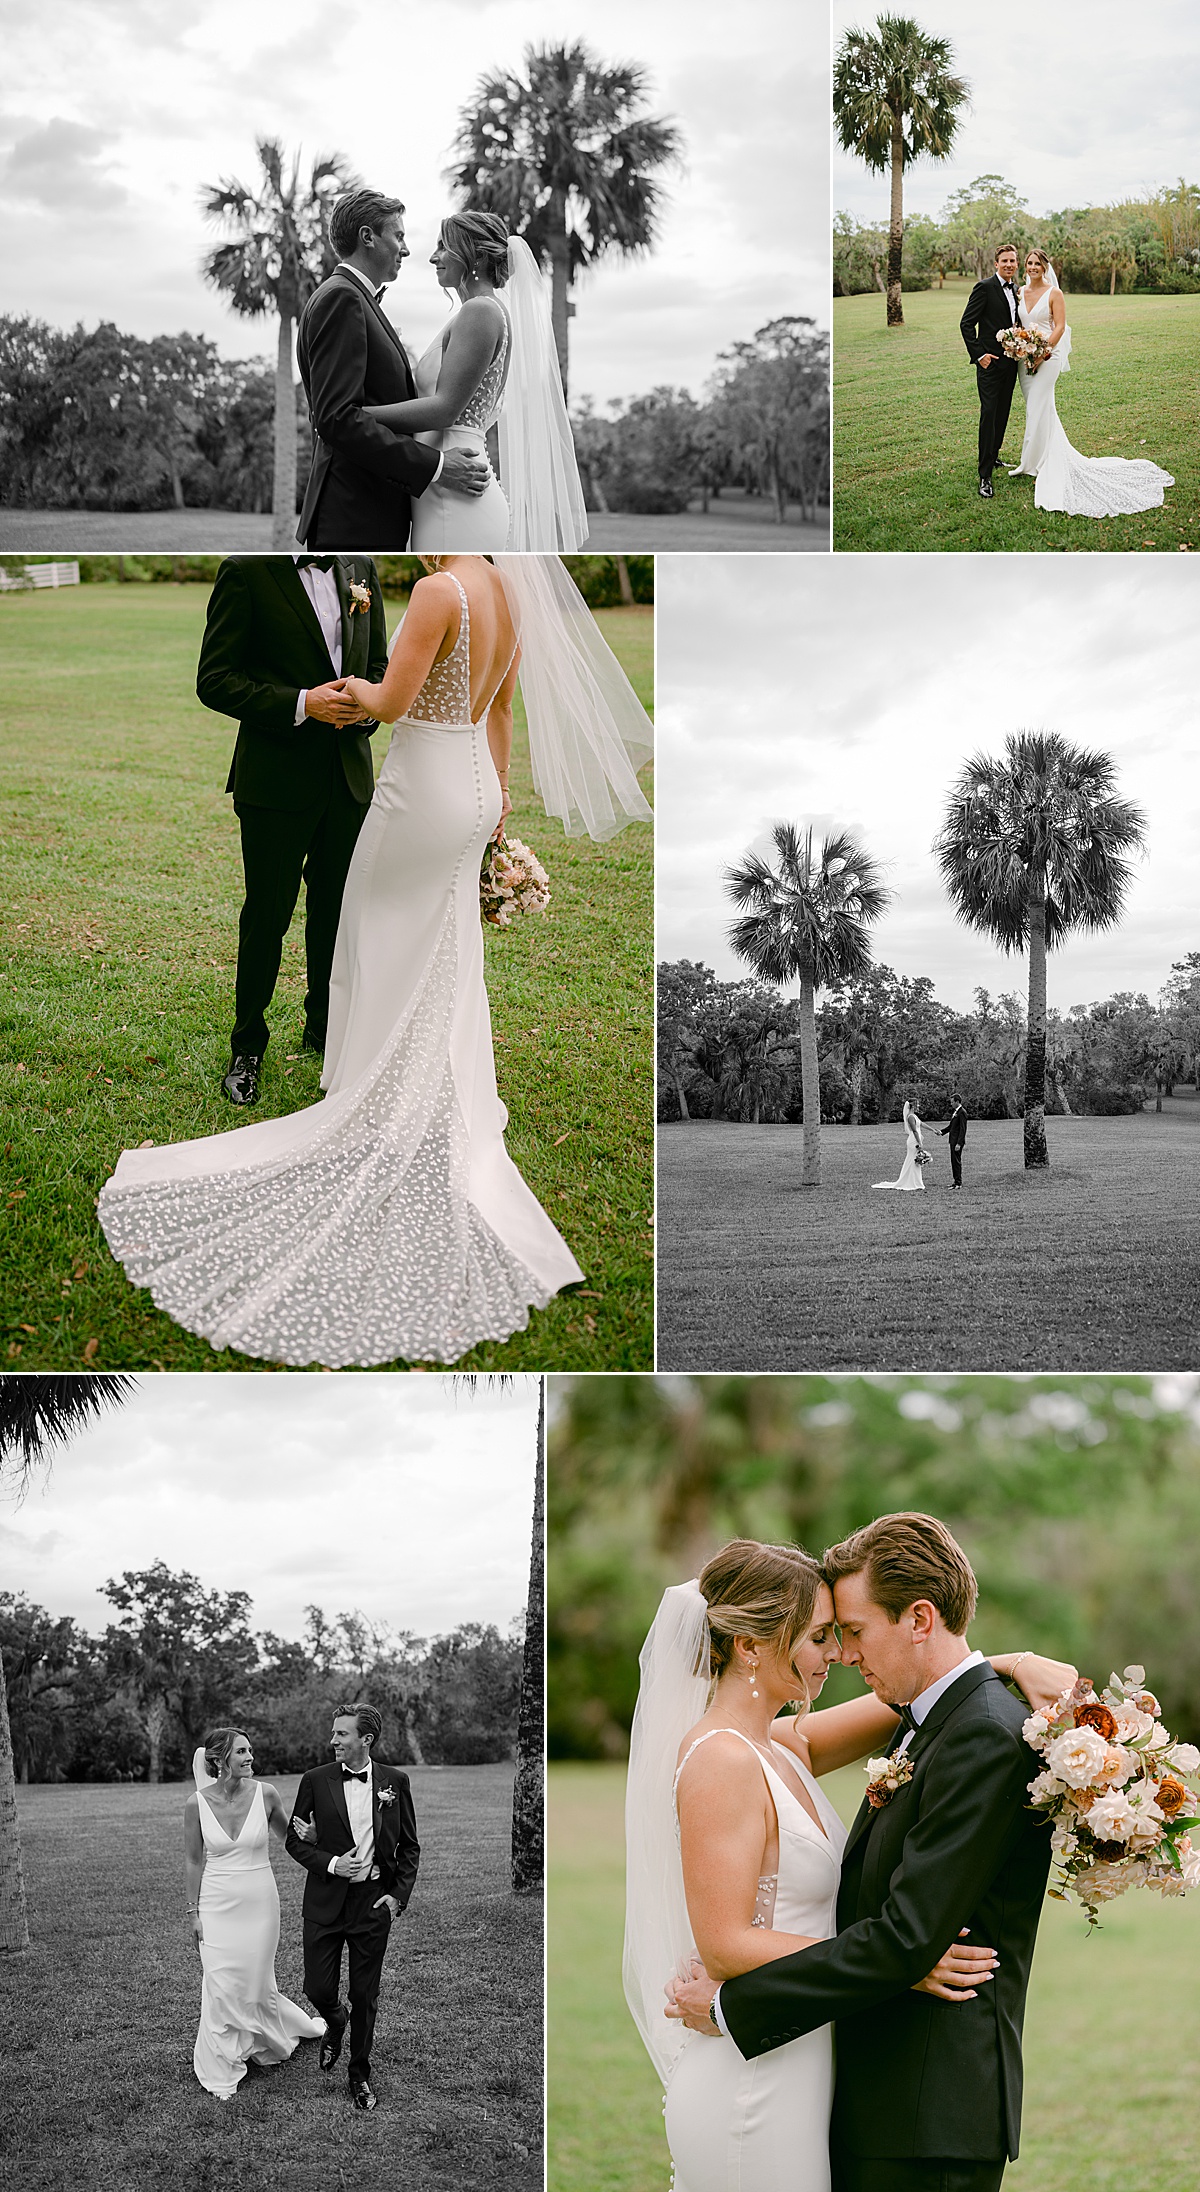 Bride and groom destination wedding day portraits on a grass lawn with palm trees in Malabar, Florida.